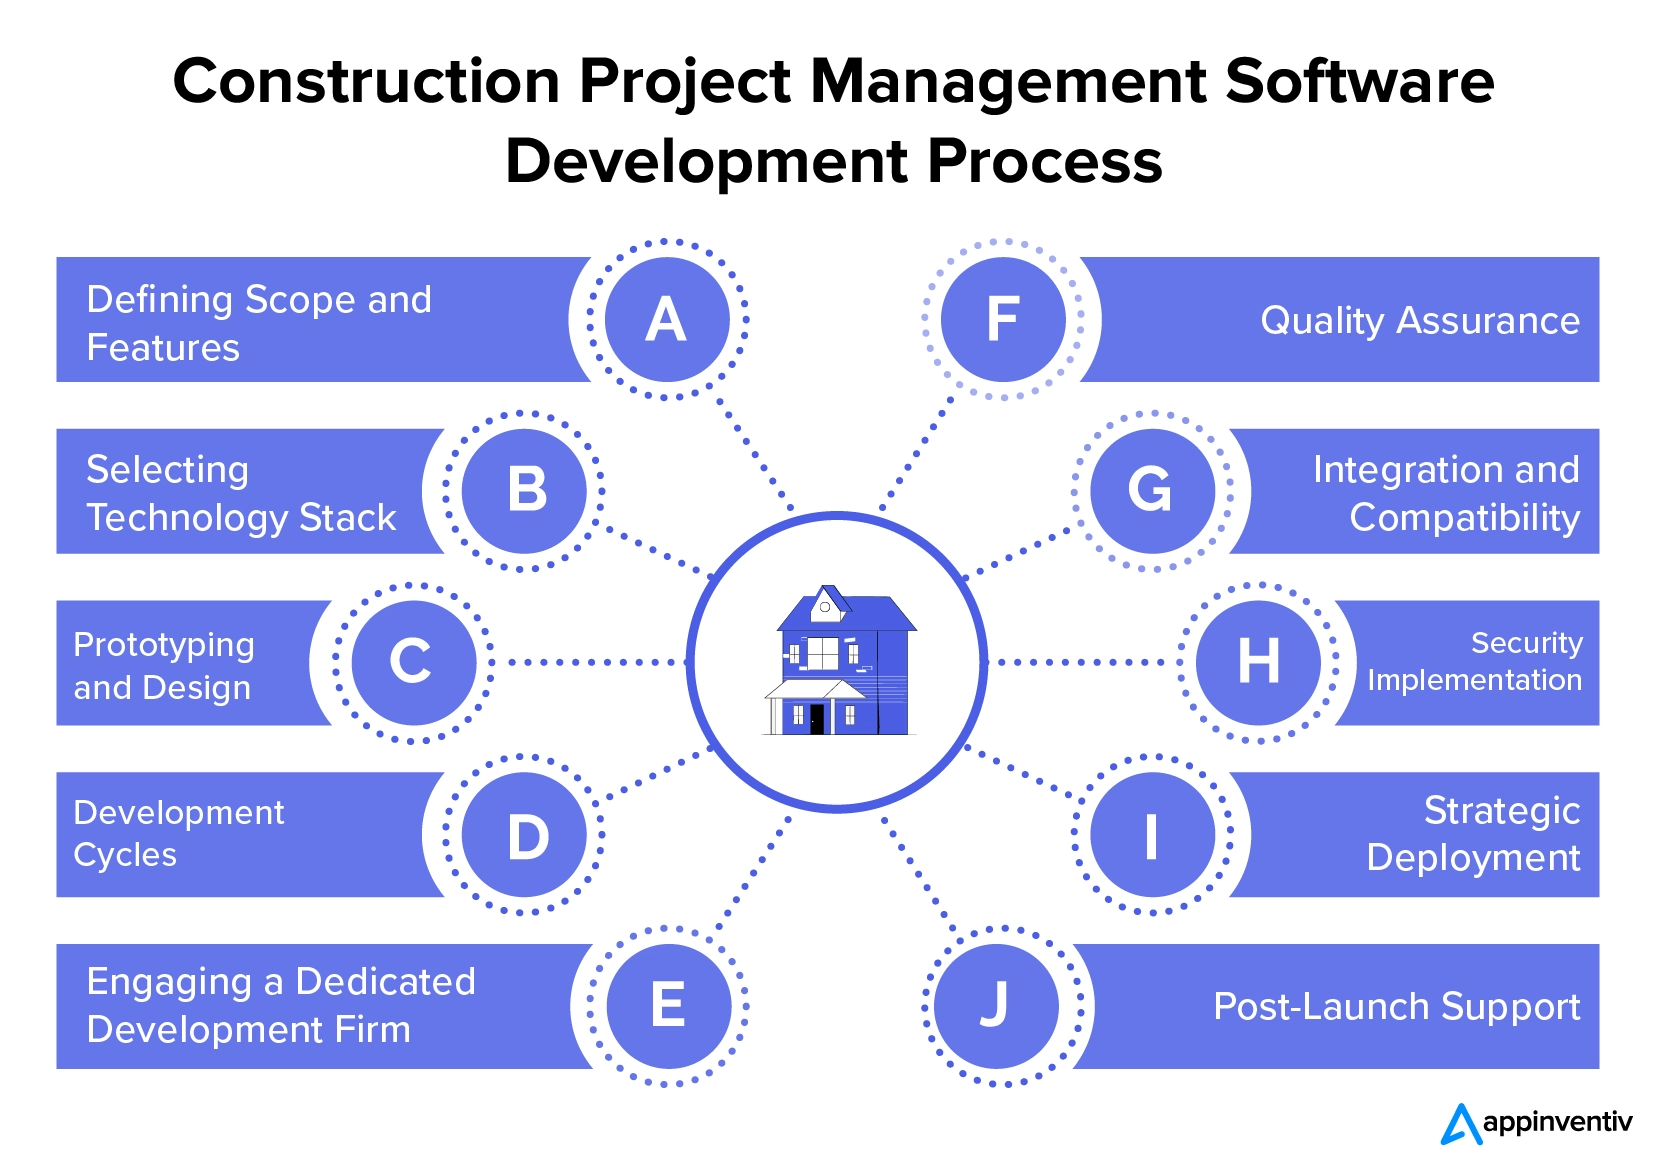 Steps to Develop a Construction Project Management Software for Construction Industry